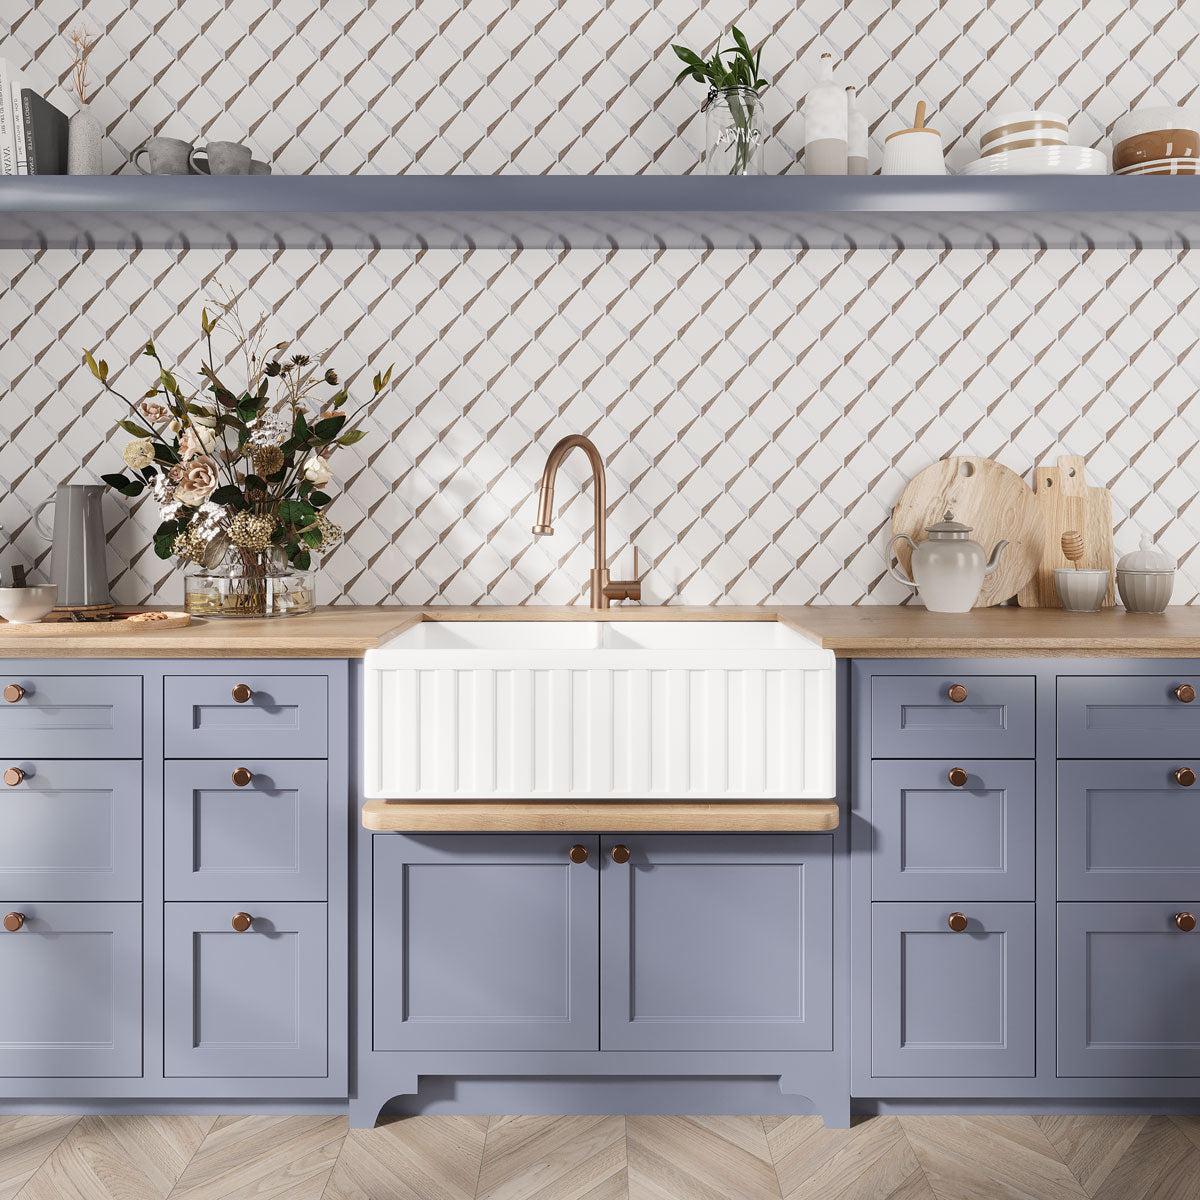 Blue and white kitchen with patterned marble tiles